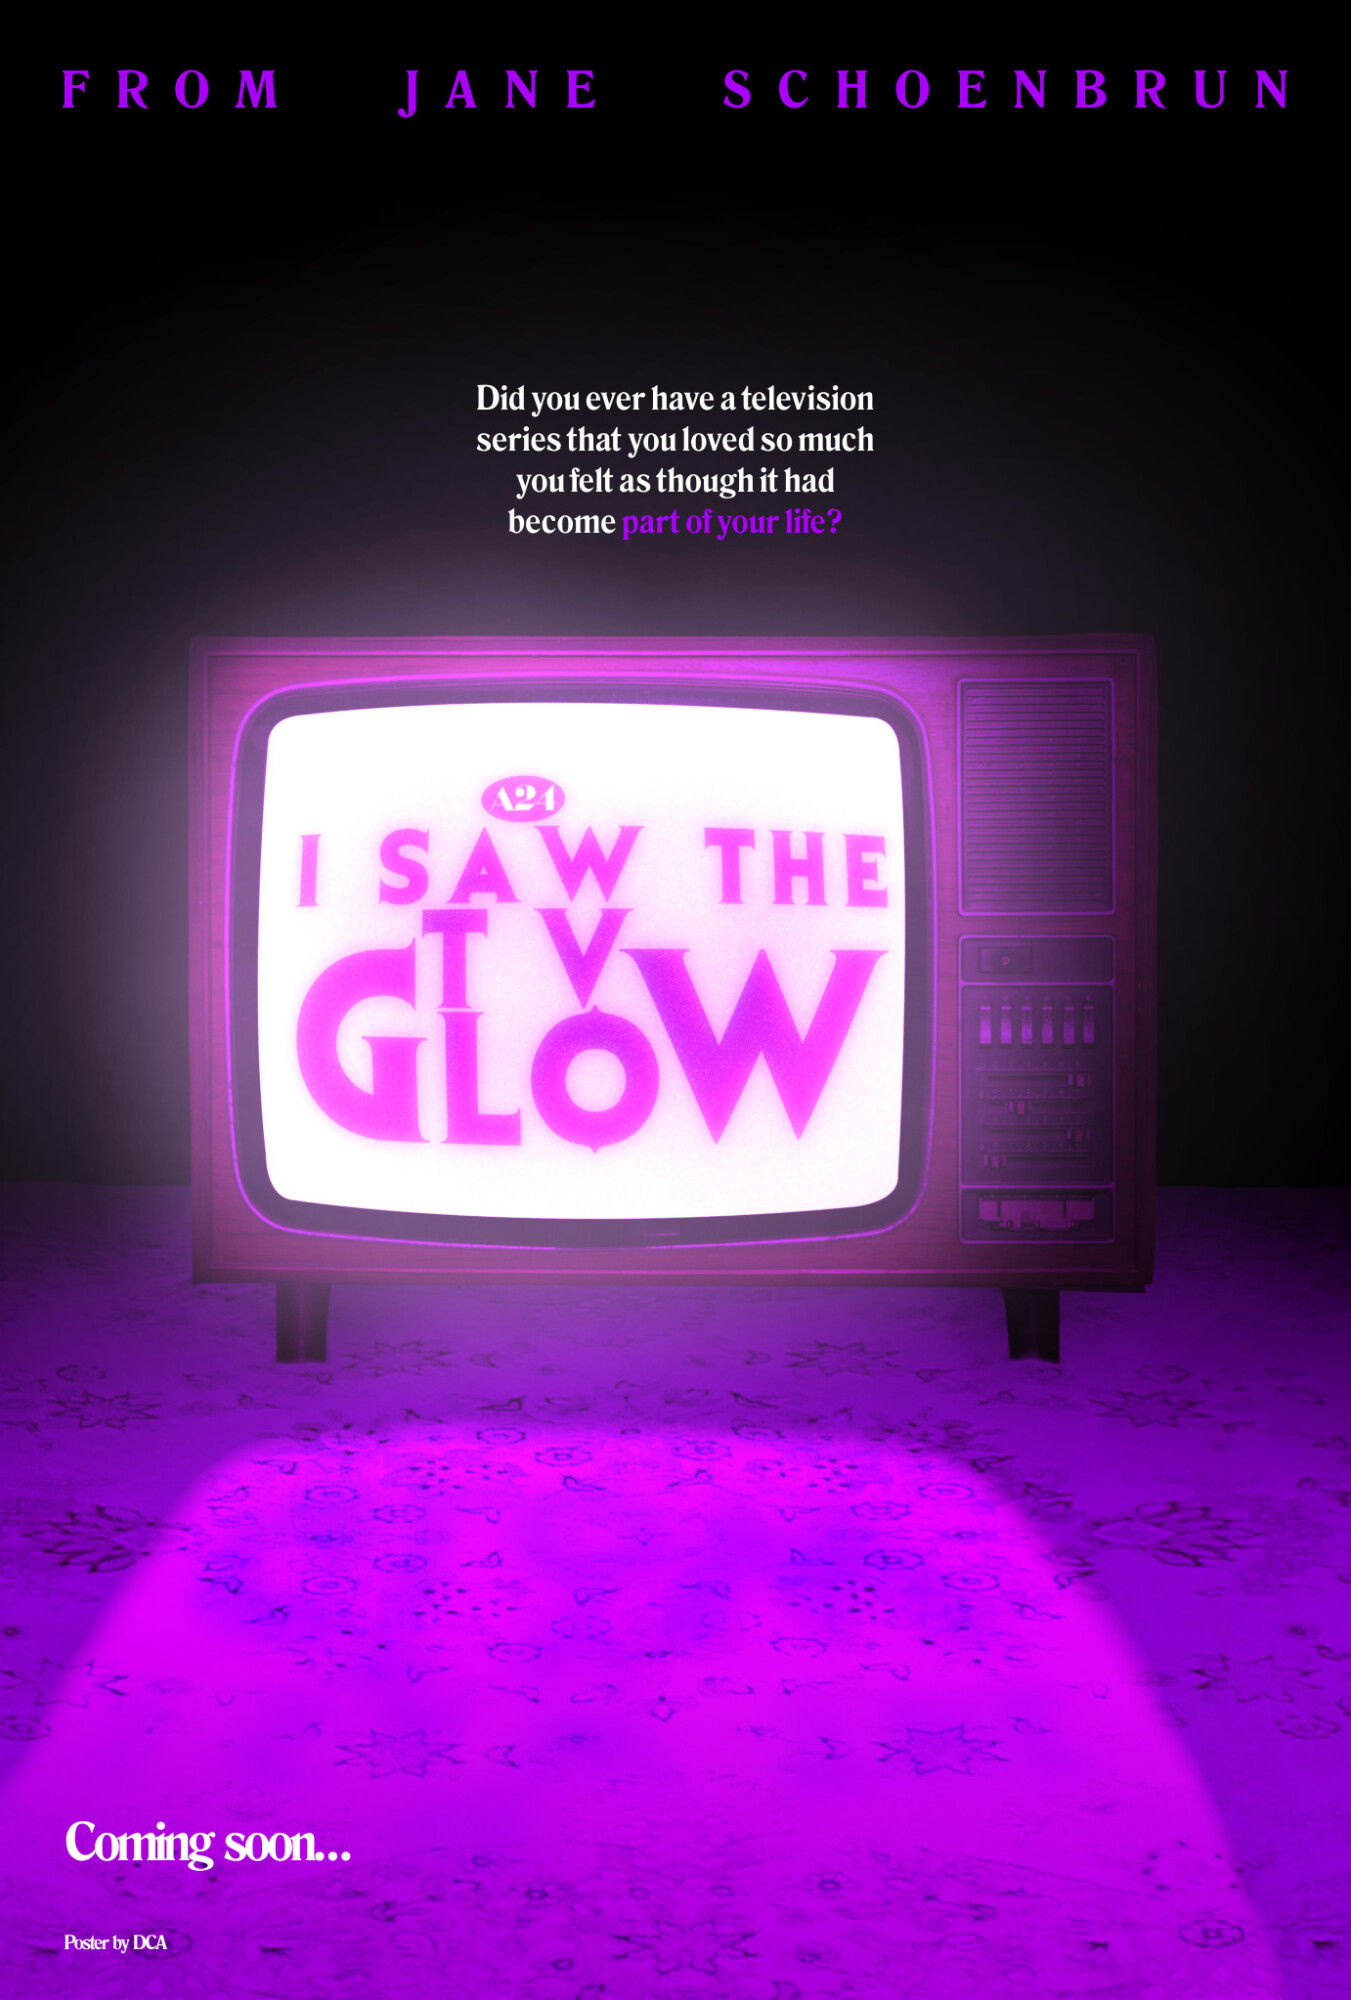 I Saw The TV Glow (TBA) Concept Poster DCA Poster Art PosterSpy